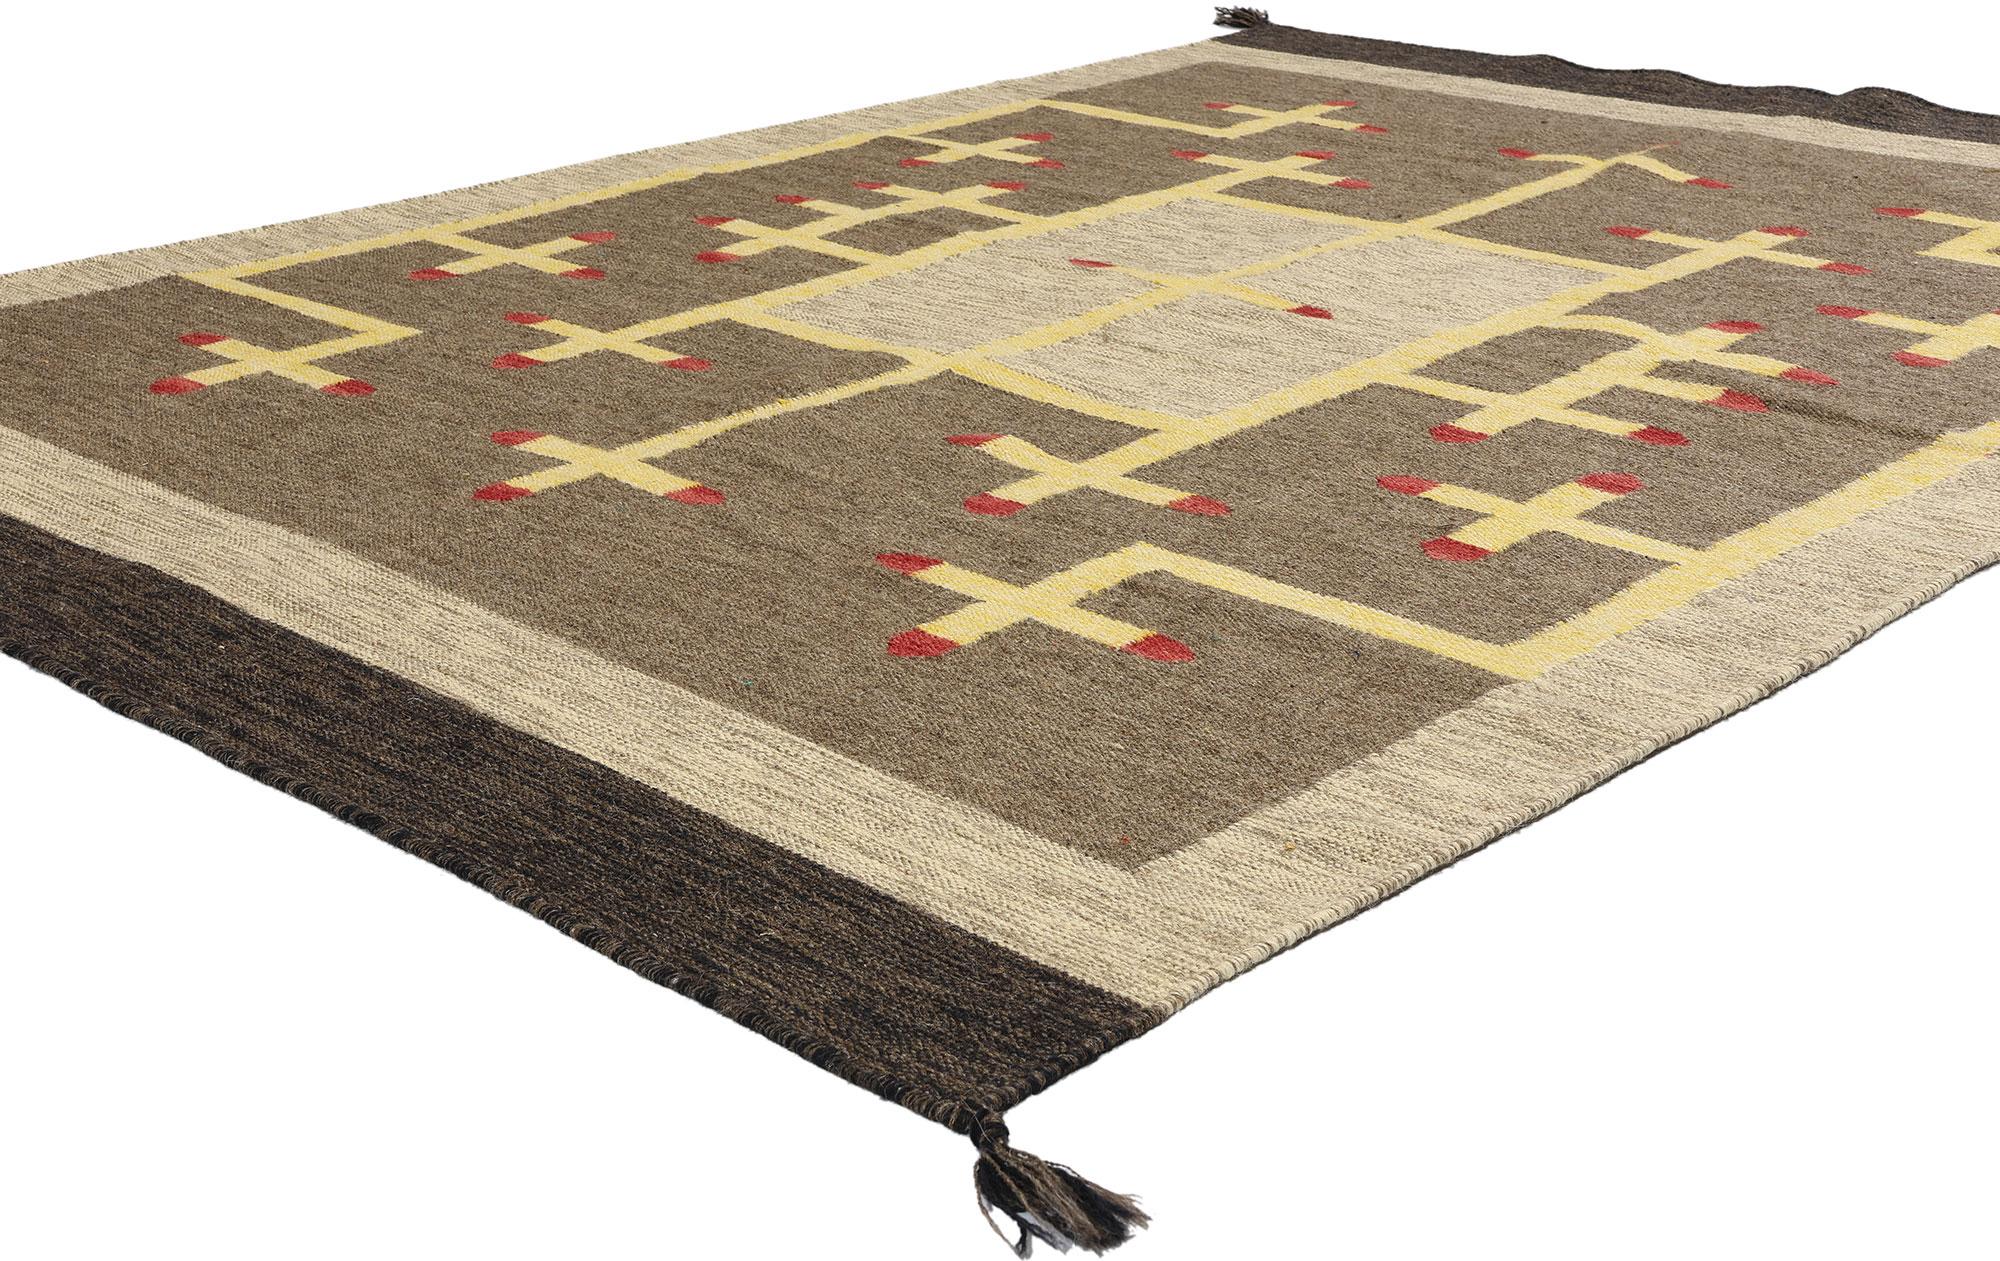 81044 Southwest Modern Ganado Navajo-Style Rug with Spiderwoman Crosses, 05'00 x 07'00. Elevate your living space with the contemporary allure of Southwest Modern aesthetics embodied in this meticulously handwoven wool Ganado Navajo-style rug. A